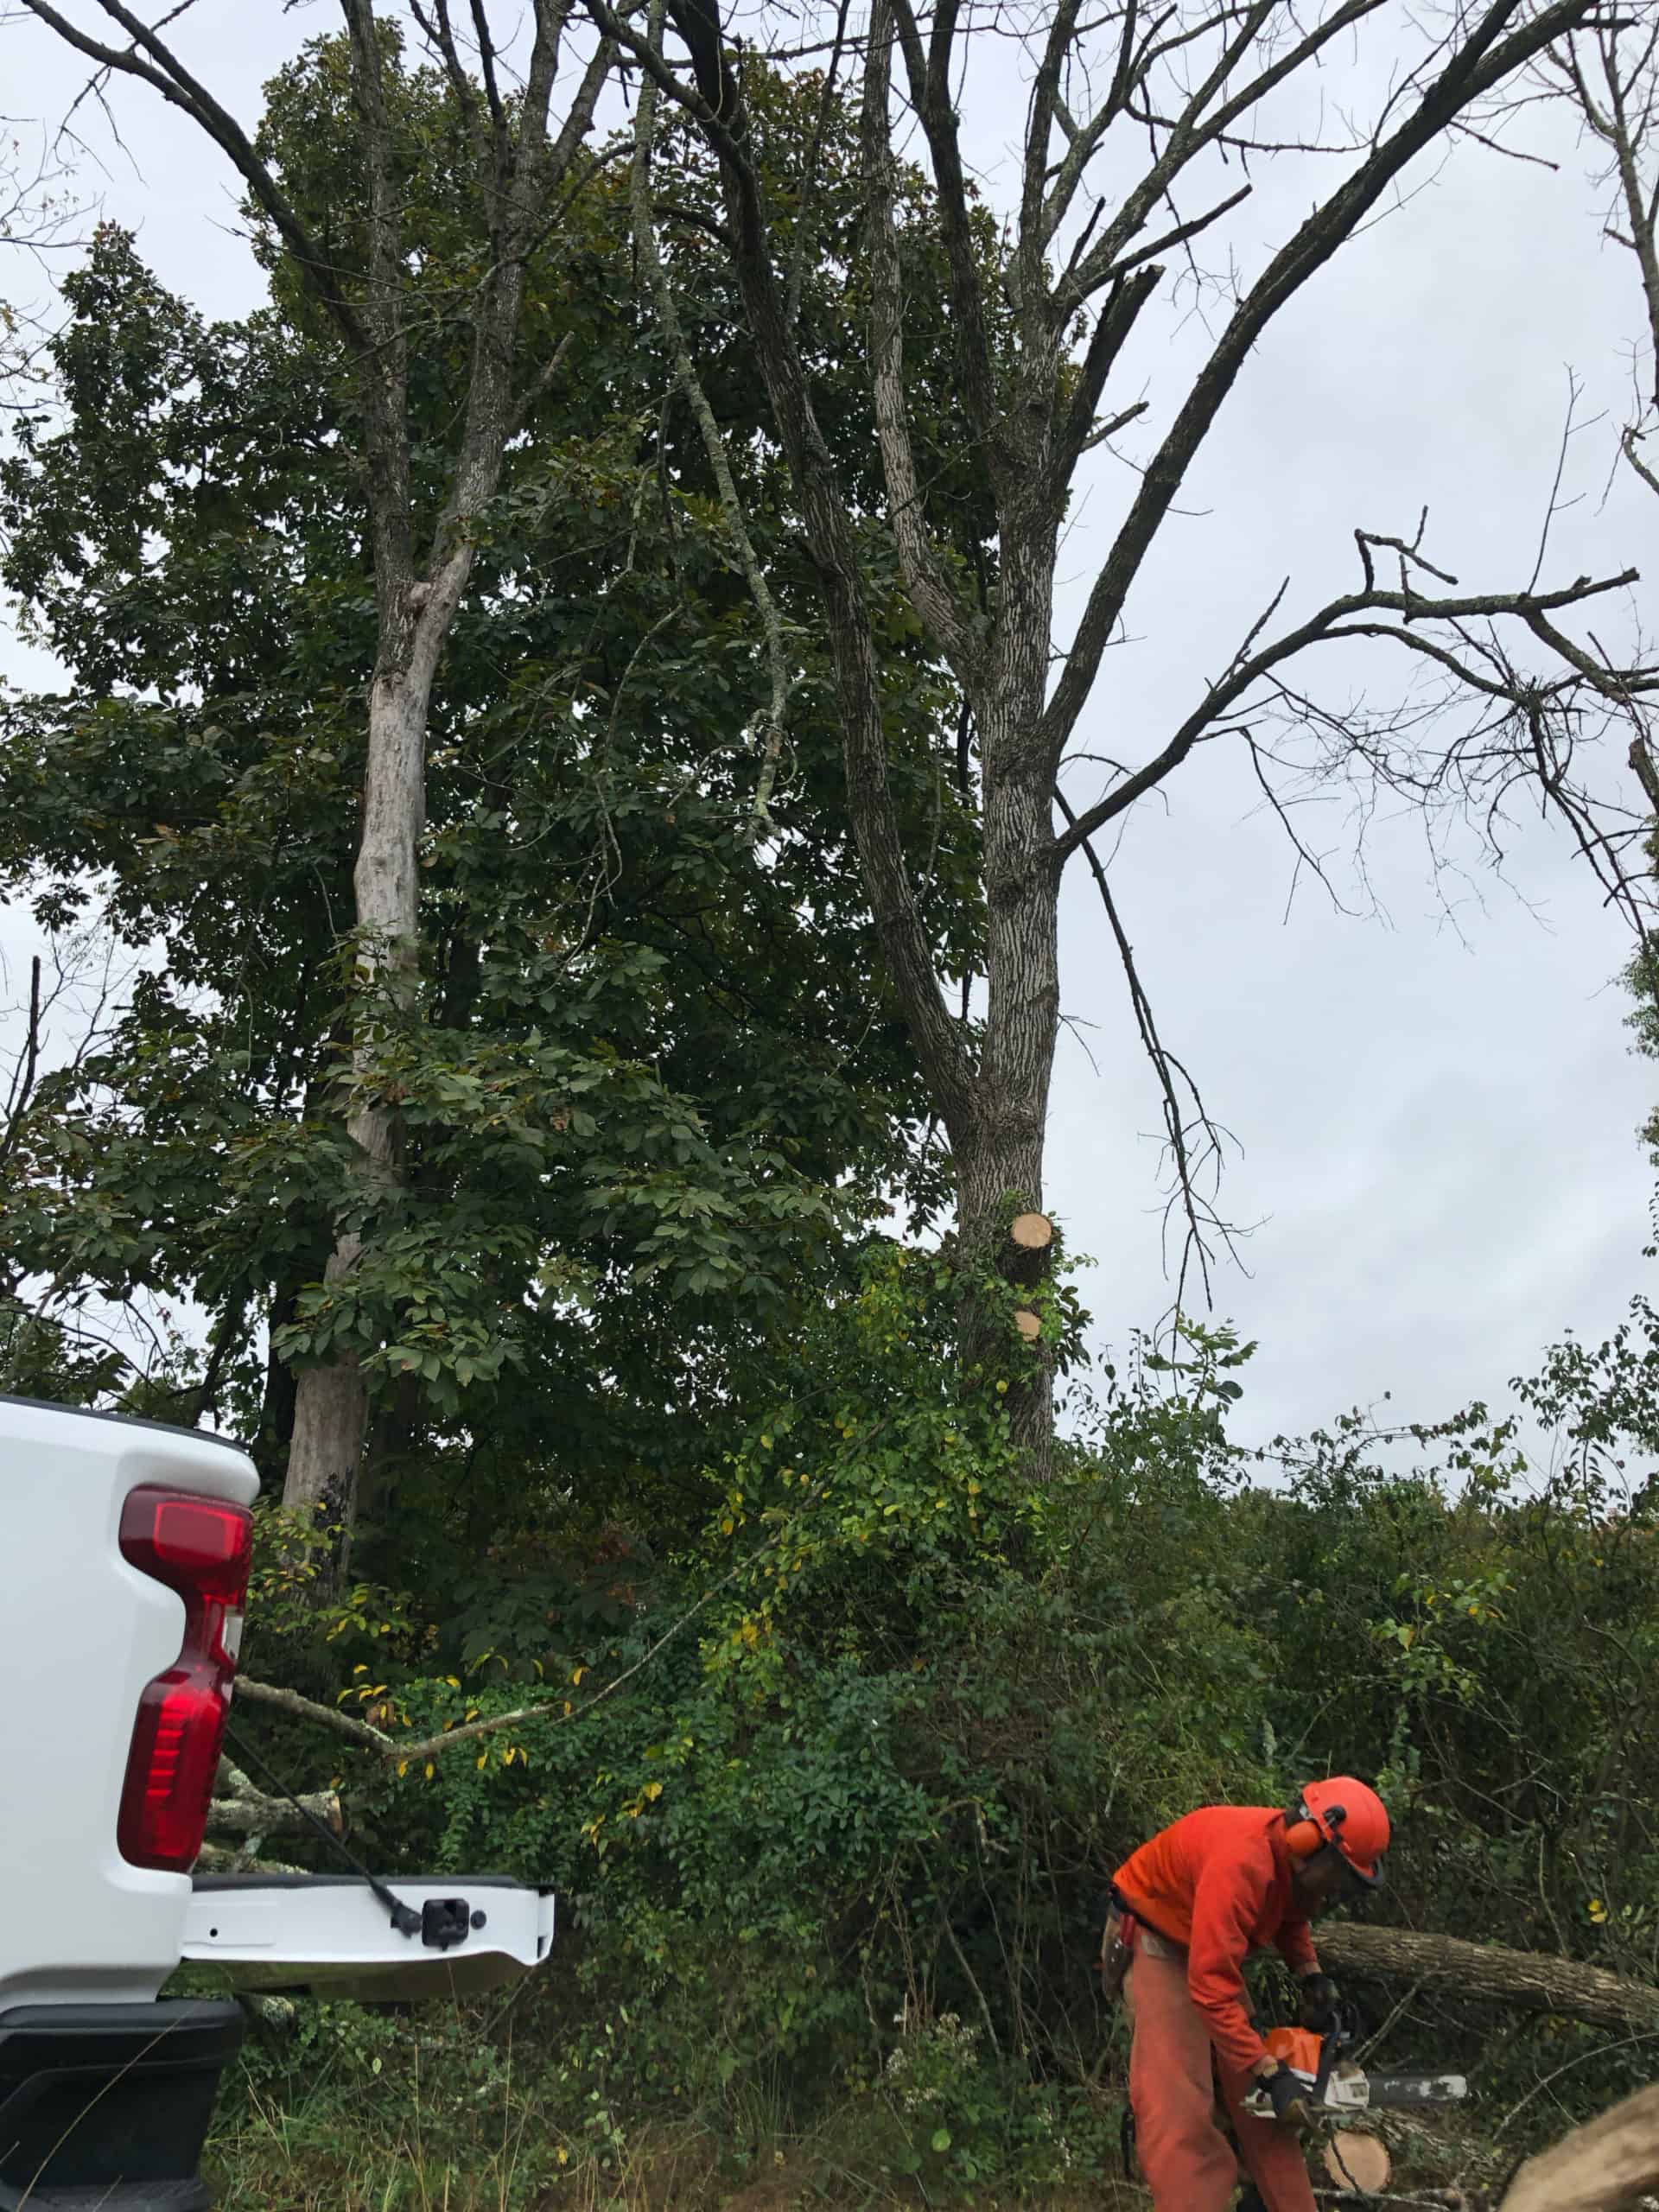 Chainsaw operator cutting up limbs from ash trees killed by Emerald Ash Borer